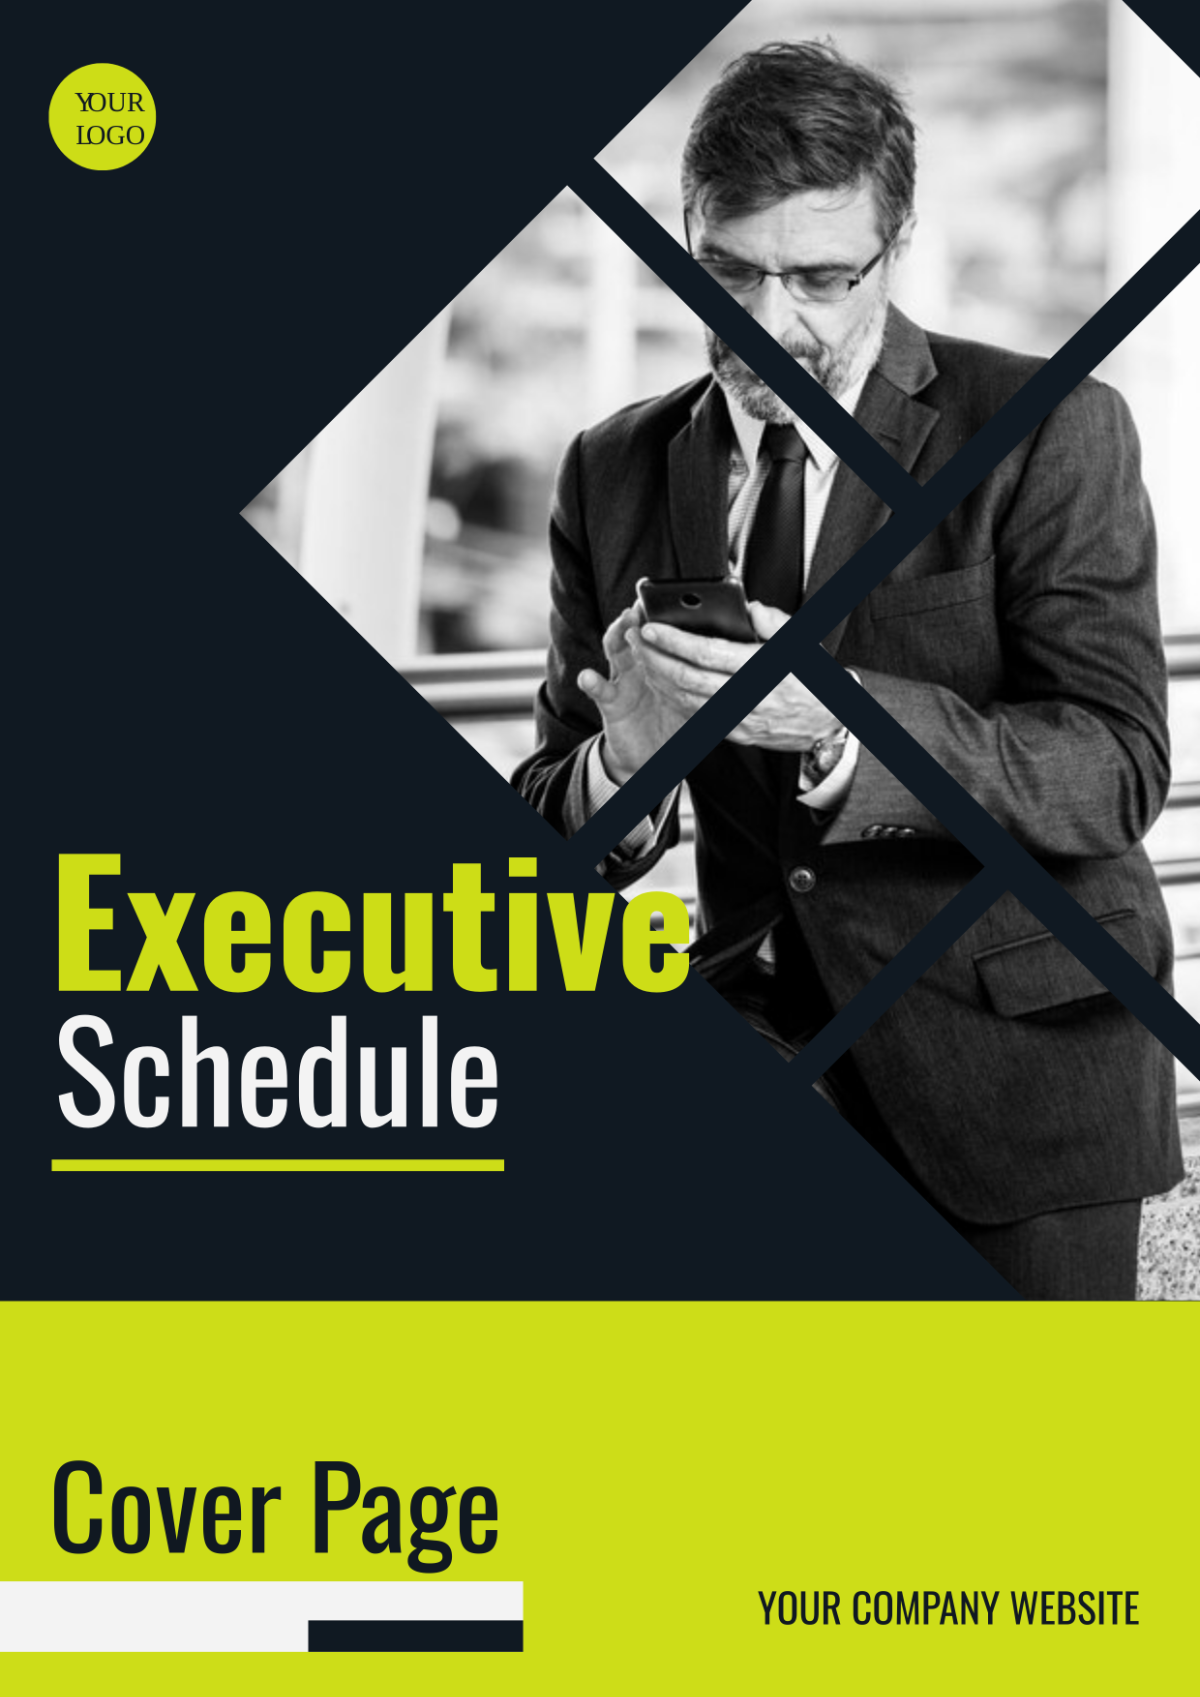 Executive Schedule Cover Page